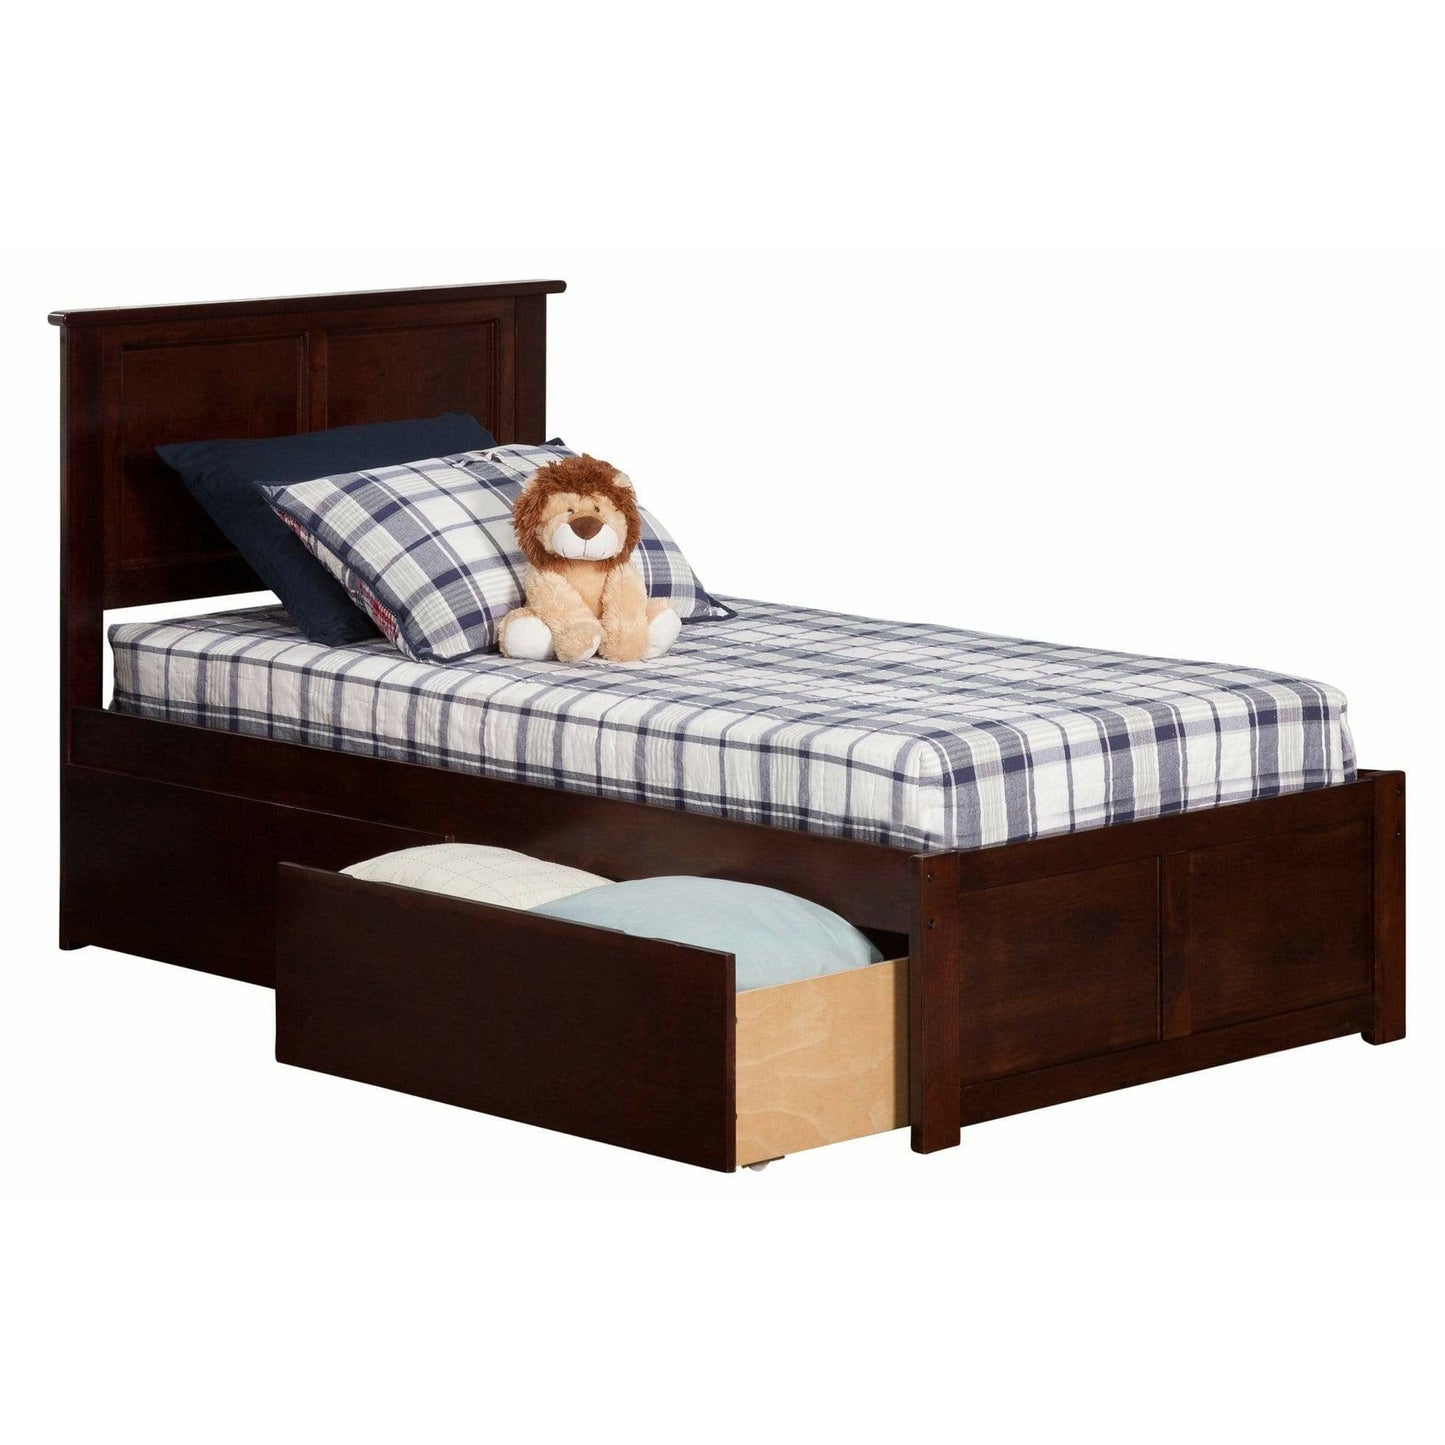 Atlantic Furniture Bed Walnut Madison Twin Platform Bed with Flat Panel Foot Board and 2 Urban Bed Drawers in Espresso